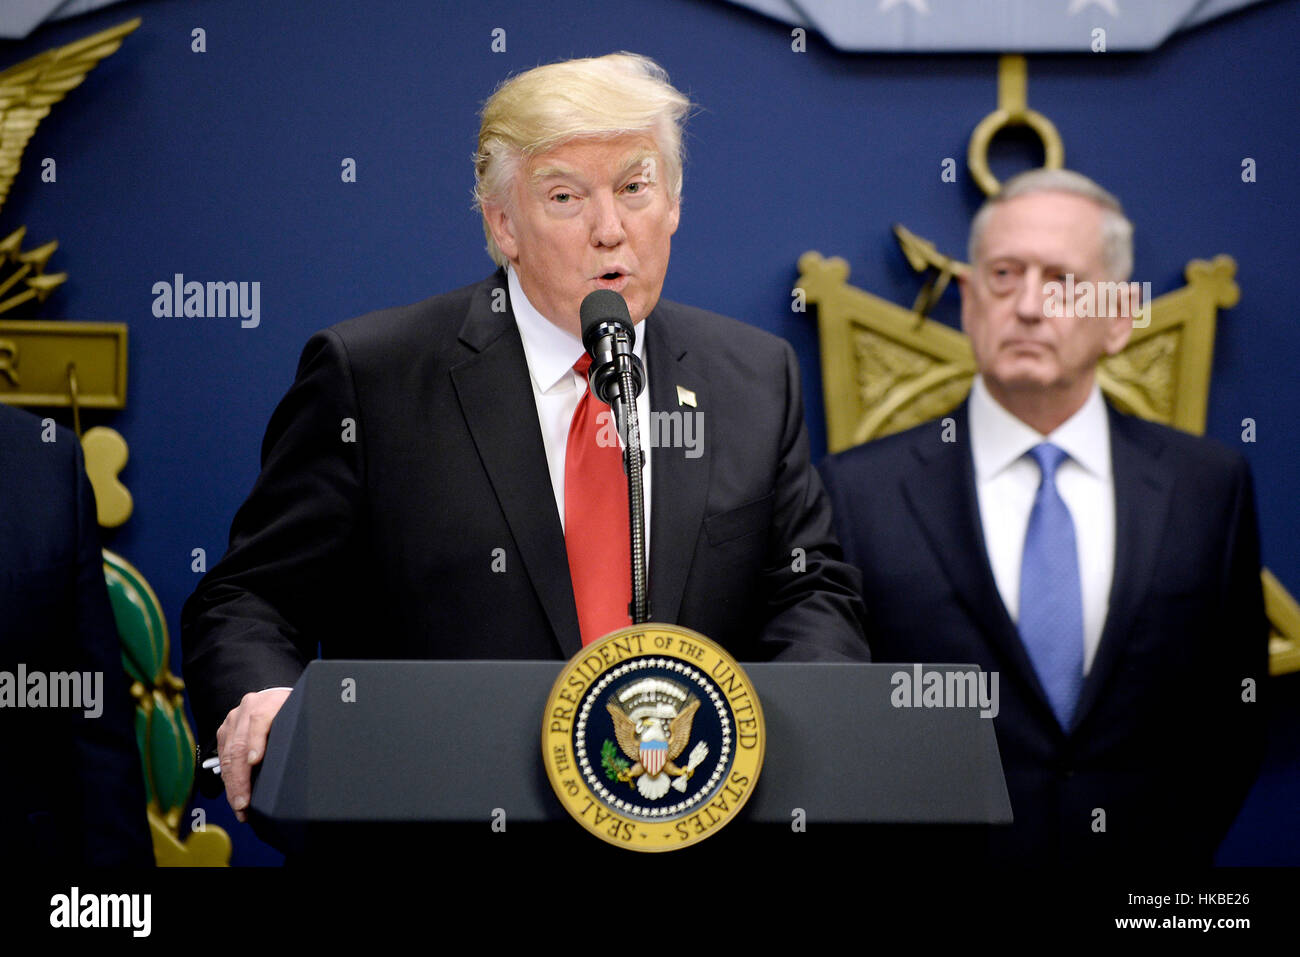 Washington, Us. 27th Jan, 2017. United States President Donald Trump speaks as Secretary of Defense James Mattis looks on in the Hall of Heroes at the Department of Defense in Virginia, January 27, 2017. Credit: Olivier Douliery/Pool via CNP - NO WIRE SERViCE - Photo: Olivier Douliery/Consolidated/dpa/Alamy Live News Stock Photo